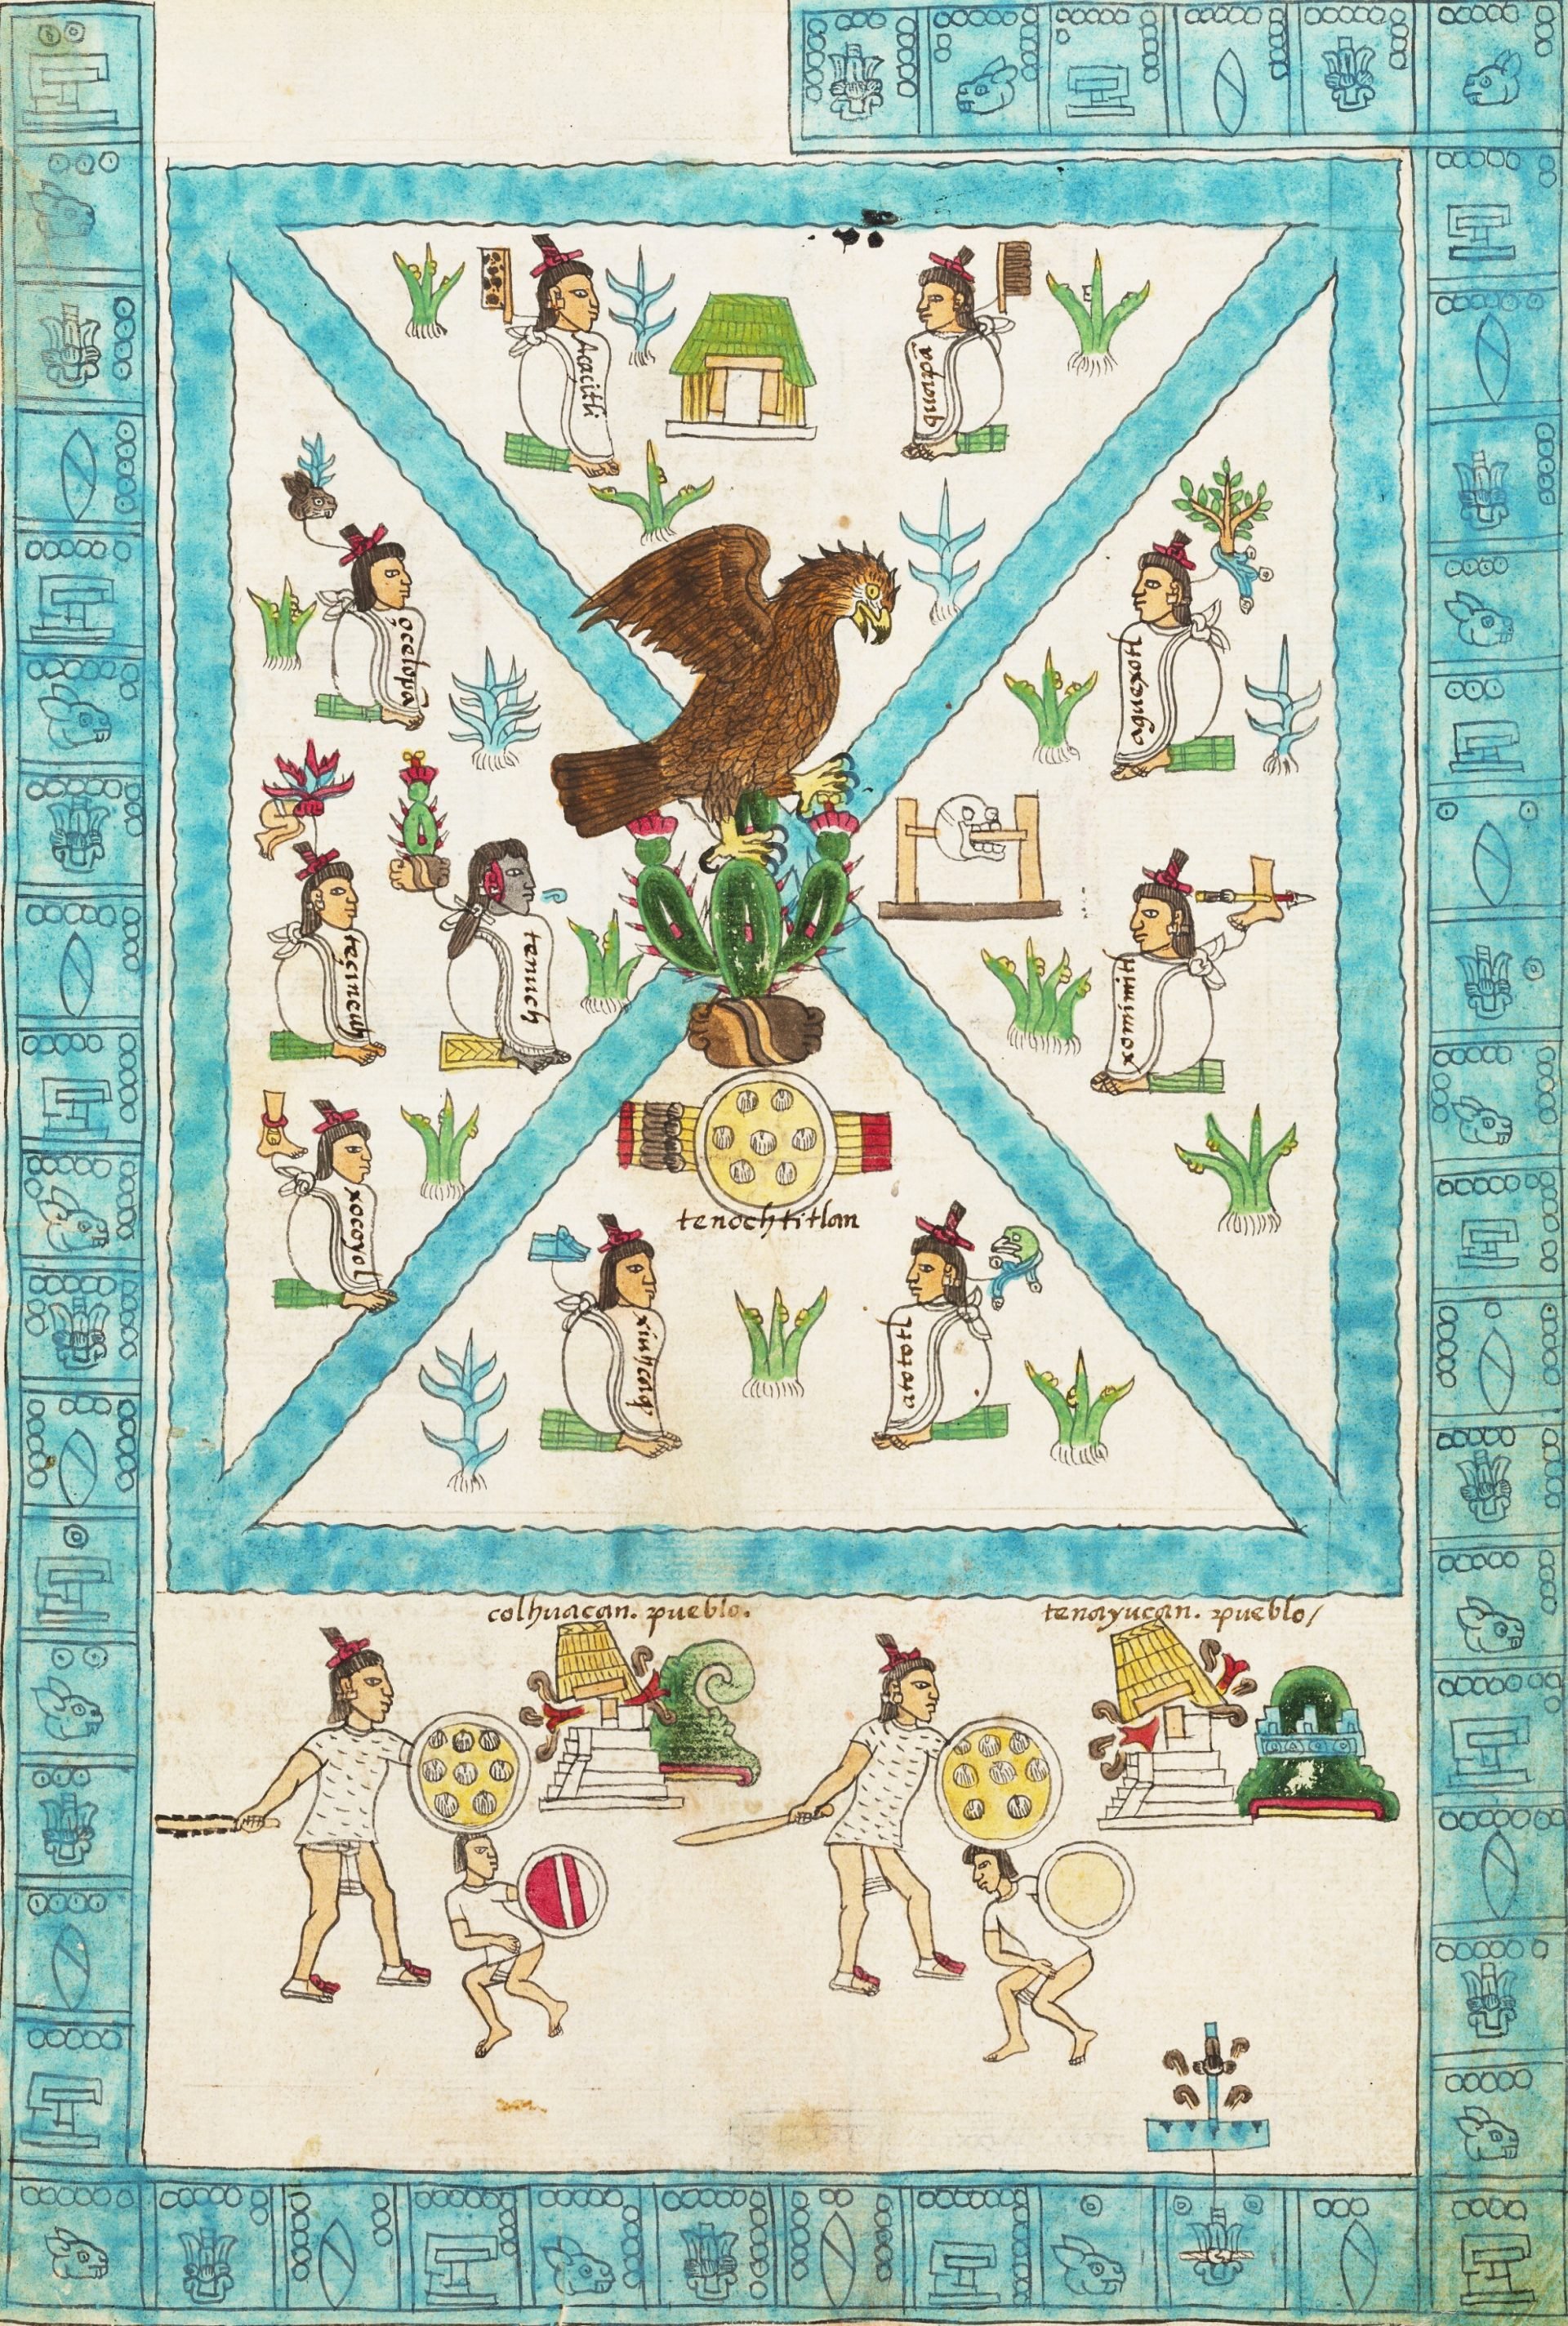 A detailed section of the Codex Mendoza illustrating the founding of Tenochtitlan. At the center, a majestic brown eagle with outstretched wings stands atop a prickly pear cactus, which grows from a stone. Surrounding this central imagery are several human figures adorned in traditional attire. Some are holding objects, such as flowers, plants, and tools, while others are depicted in various states of activity, showcasing aspects of daily life. In the bottom section, warriors with shields and weapons appear. The left and right borders of the page feature a series of hieroglyphic symbols and depictions. Each corner of the main section has a small illustration, possibly indicating specific locations or tribes.